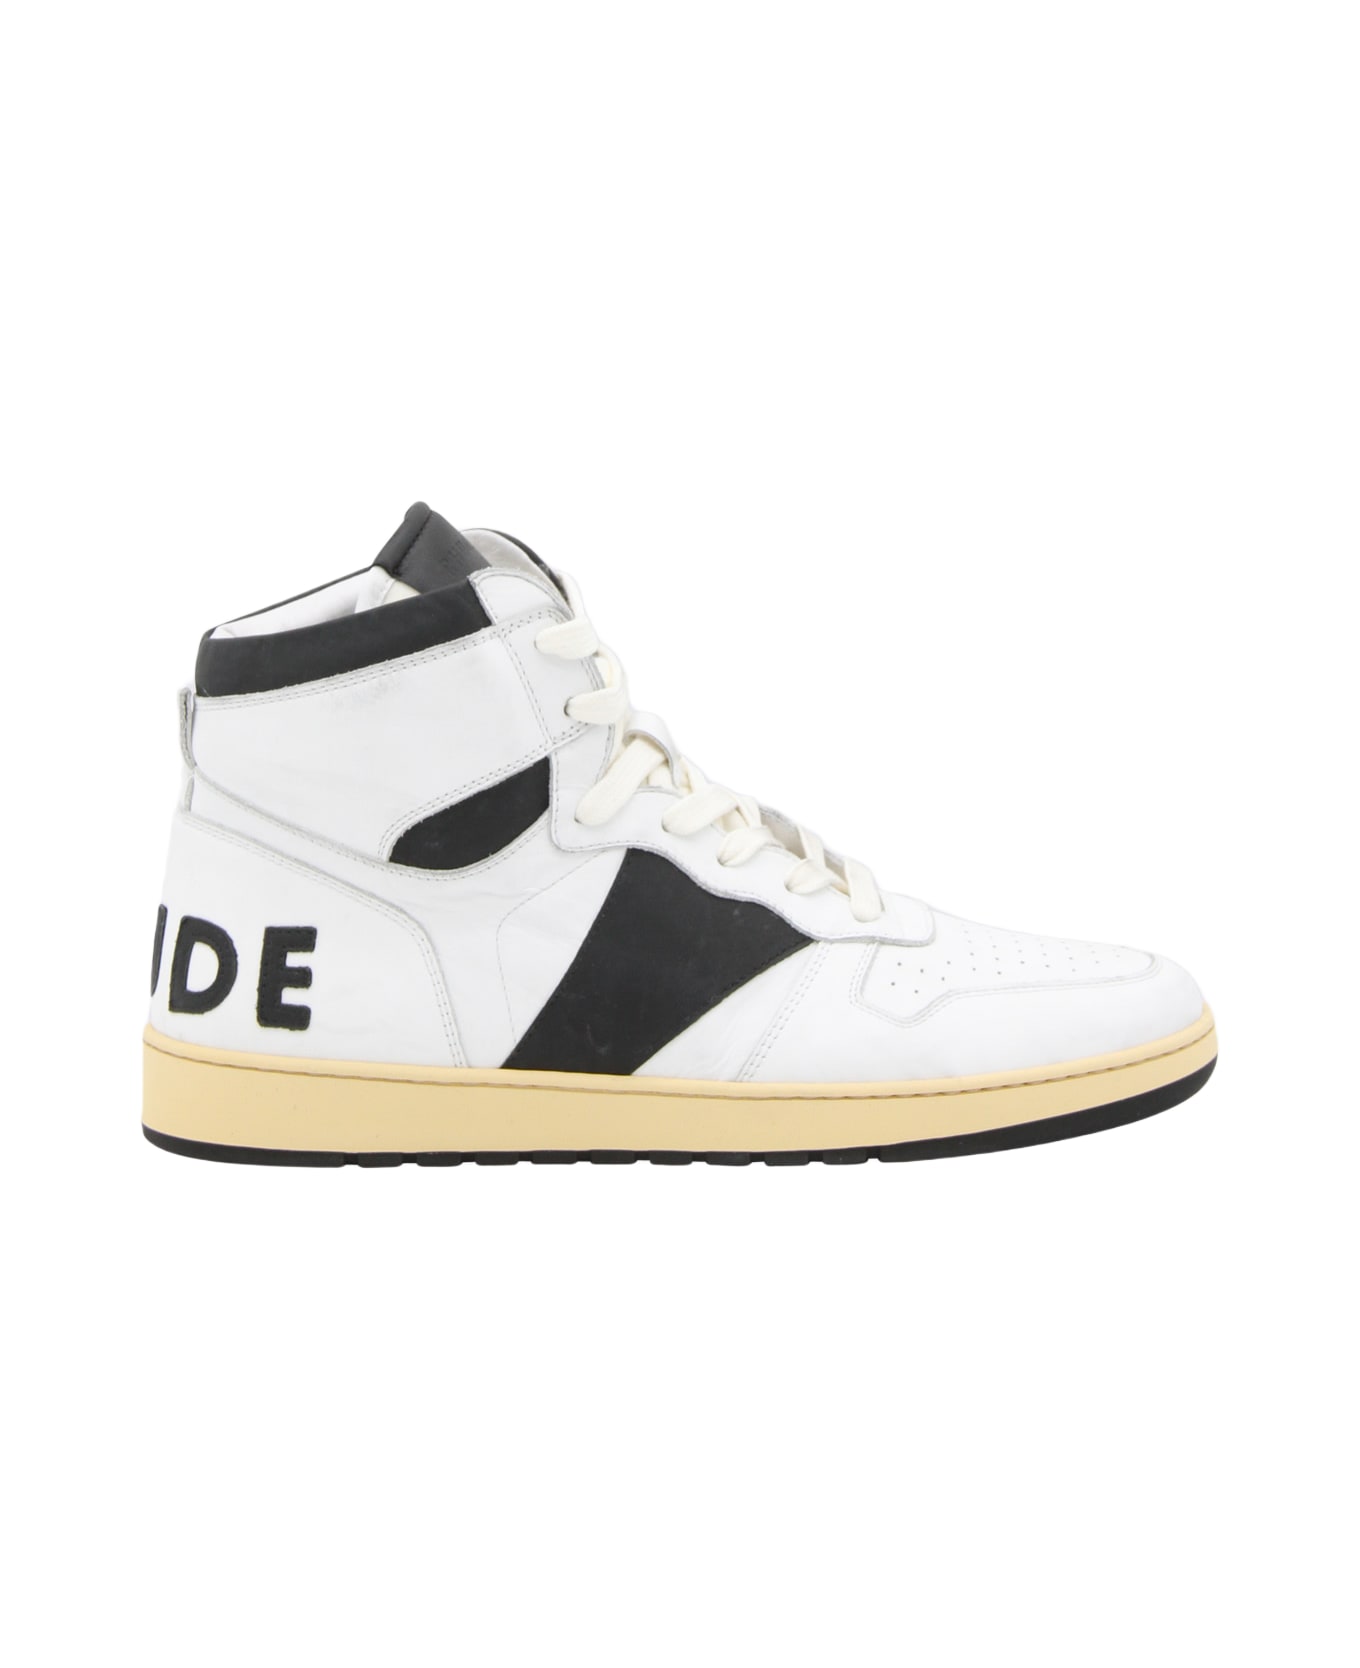 Rhude White Leather Rhecess Sneakers - White